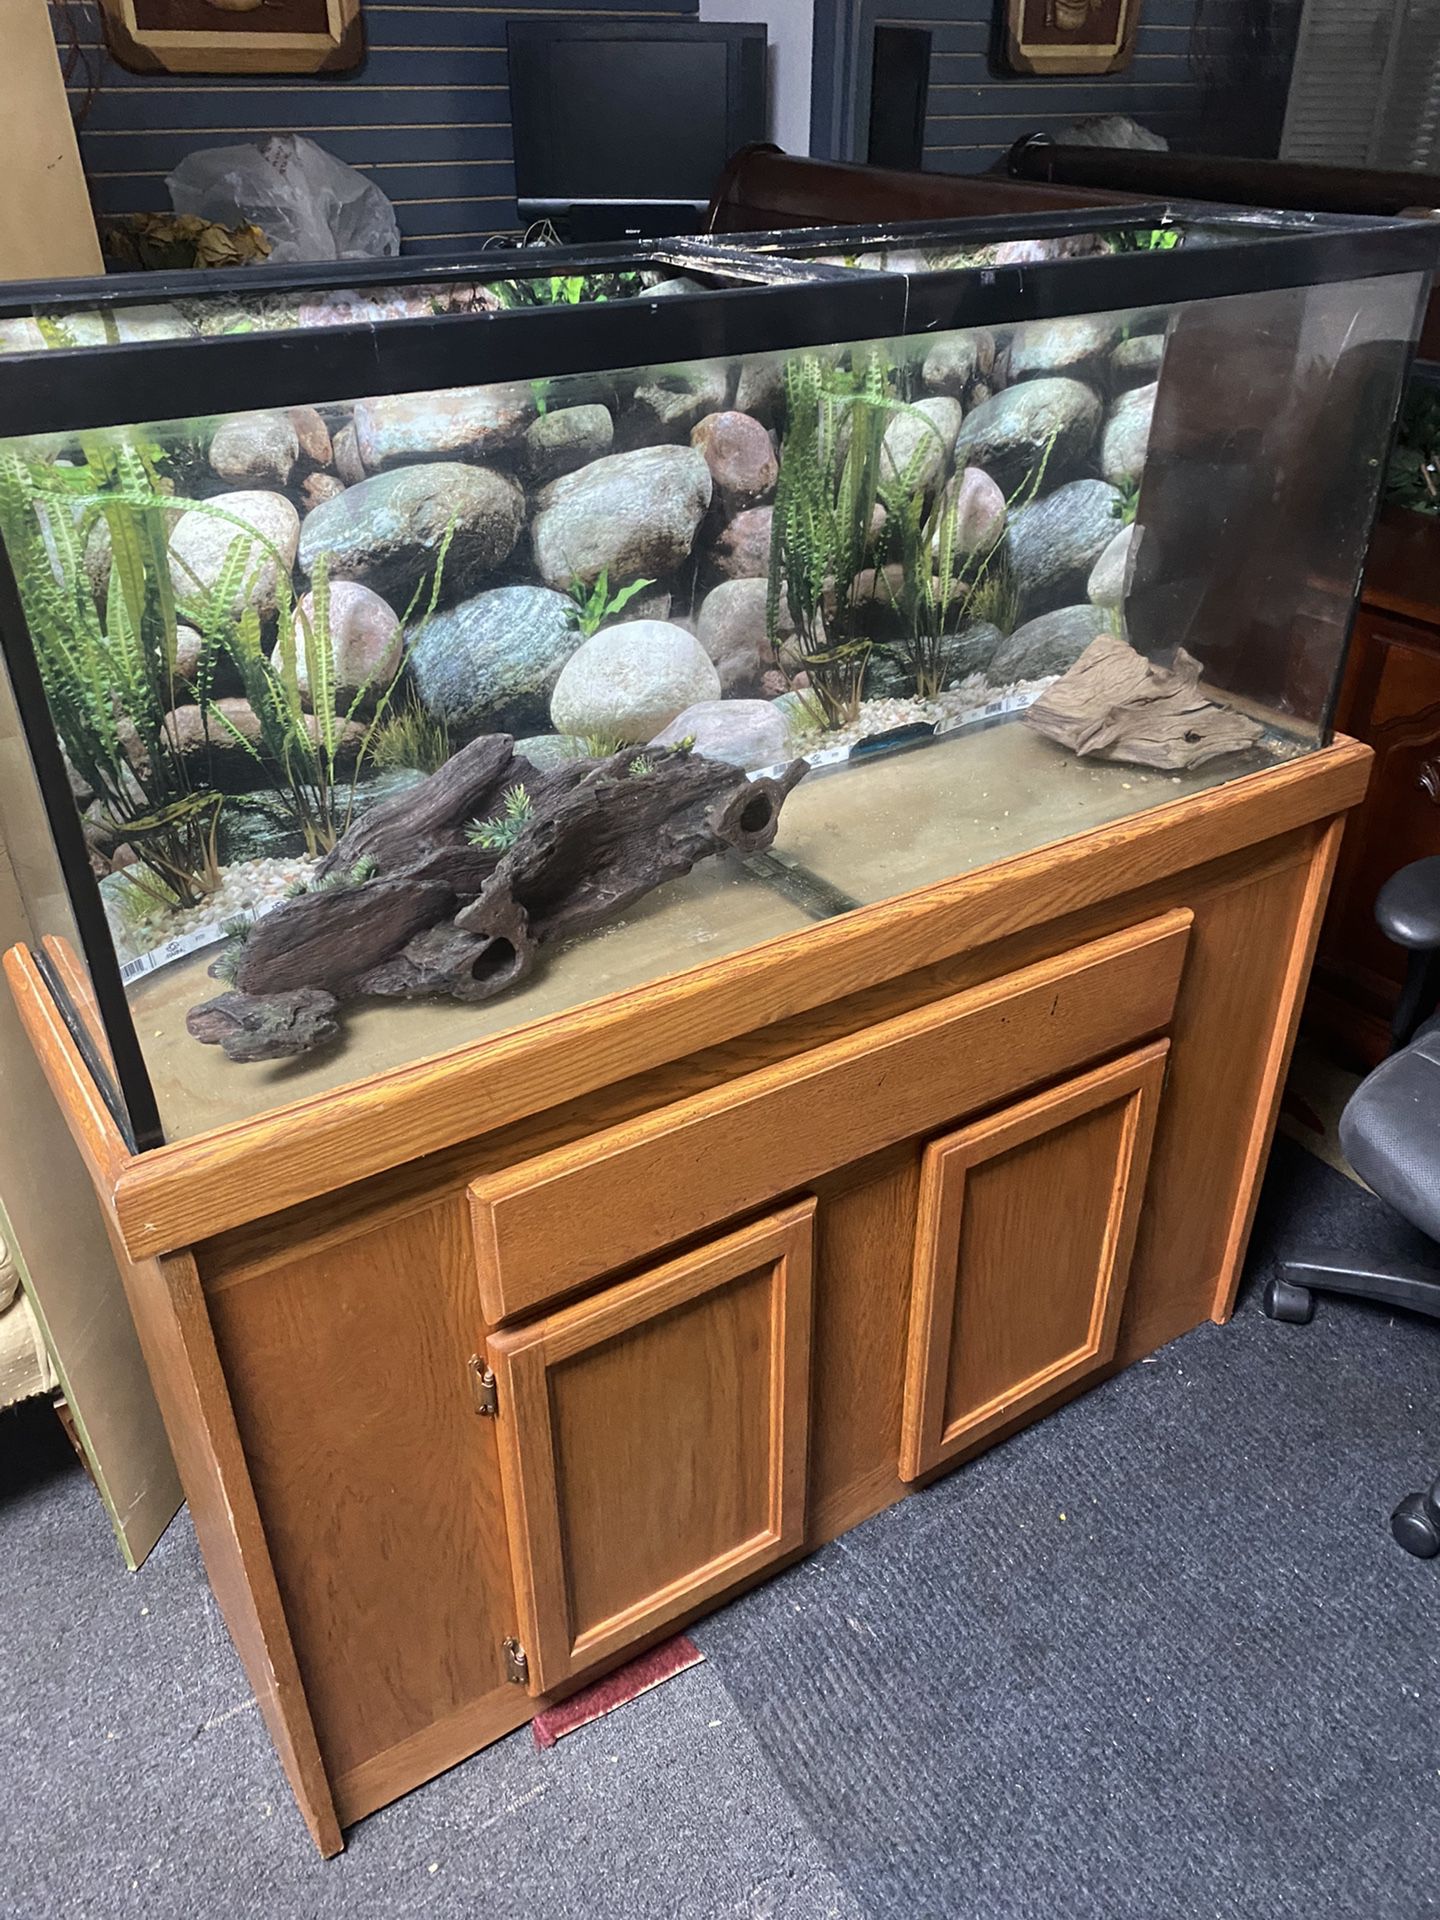 55 galons fish tank for reptiles only 